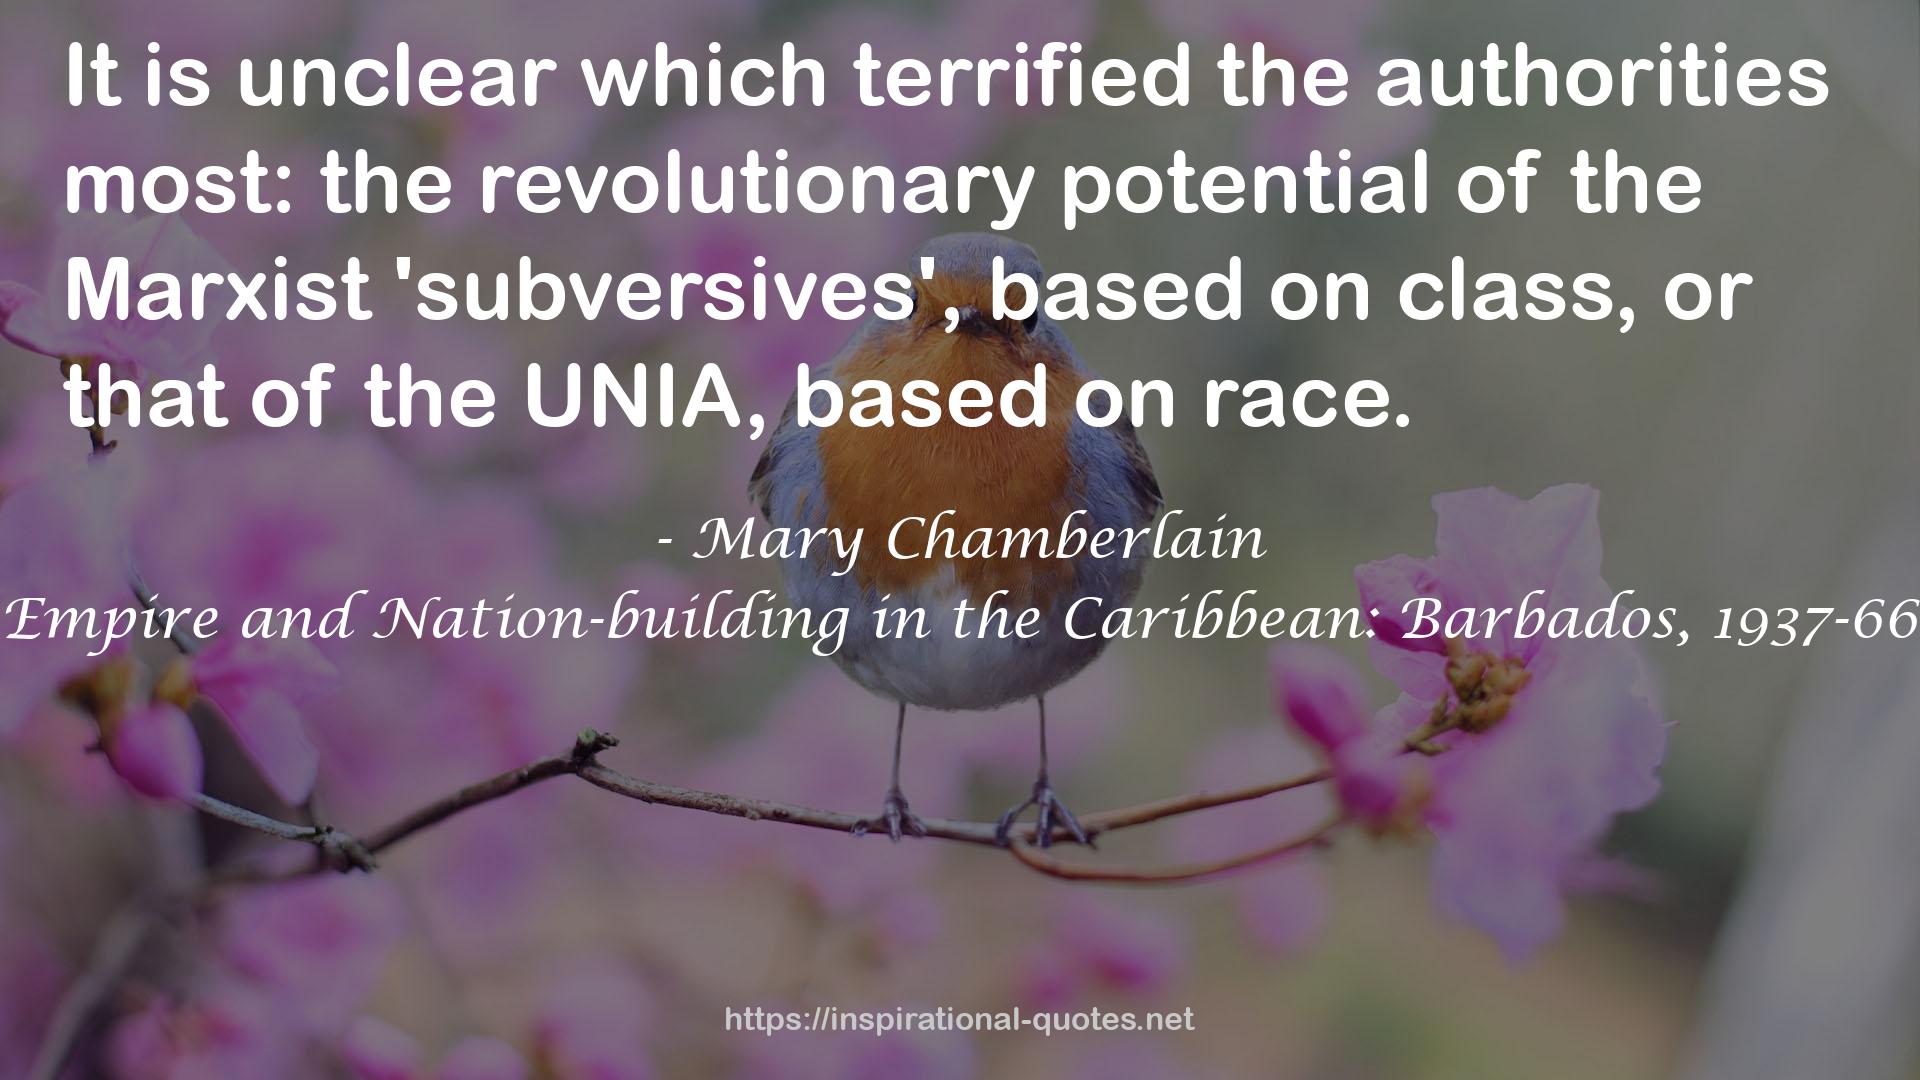 Empire and Nation-building in the Caribbean: Barbados, 1937-66 QUOTES